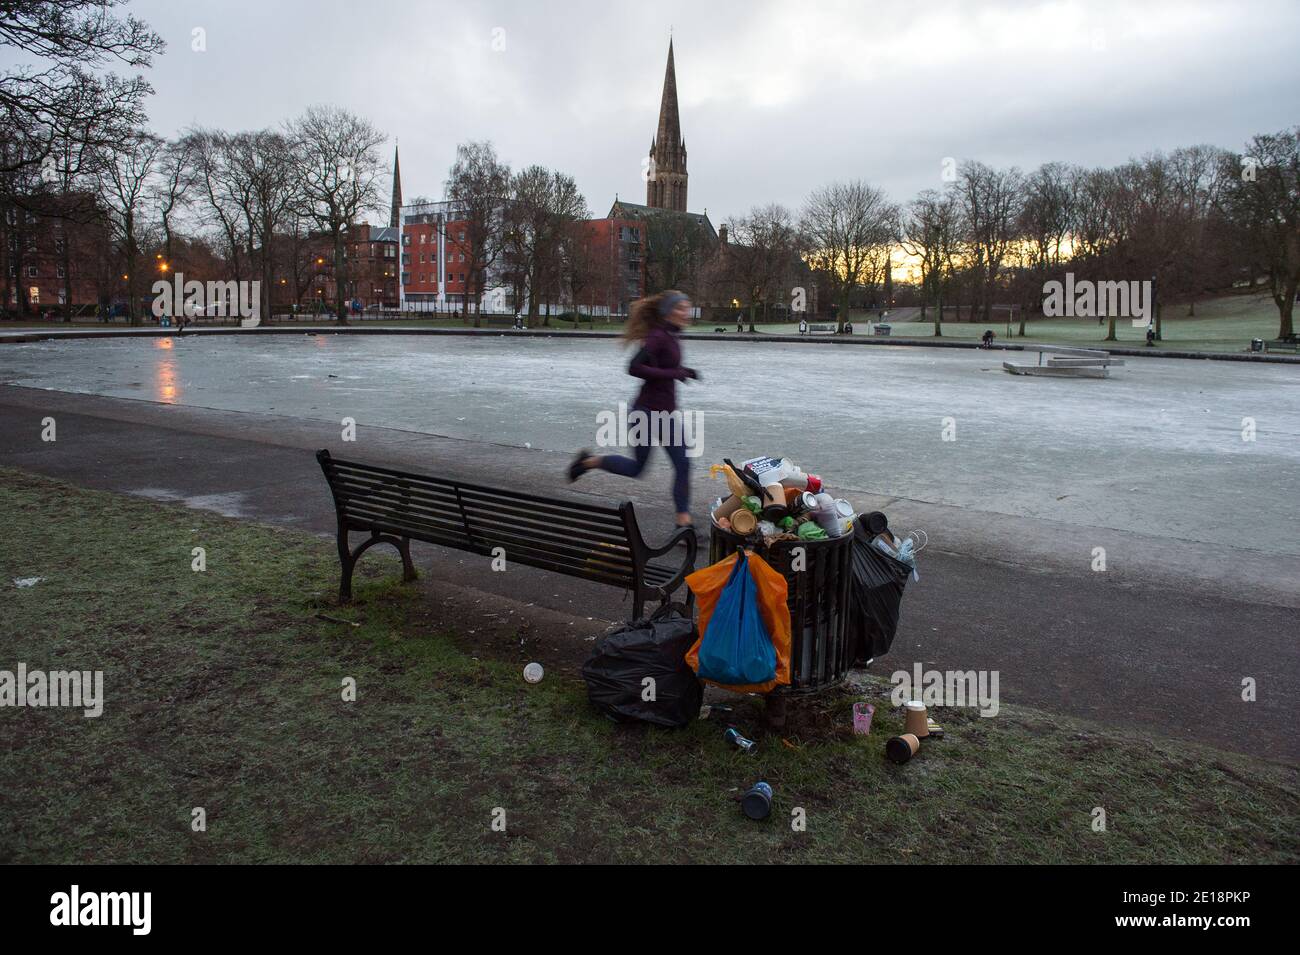 Glasgow, Scotland, UK. 5 January 2021. Pictured: A jogger taking in morning exercise. Queens Park in Shawlands, this morning showing only a few people around the park and on the ice, form a marked contrast to the scenes yesterday which saw hundreds of people on the ice, skating, playing hockey and around the park. As of 00:01 this morning Scotland has been placed into another lockdown as per the Scottish First Minister's address at 2pm yesterday. Credit: Colin Fisher/Alamy Live News. Stock Photo